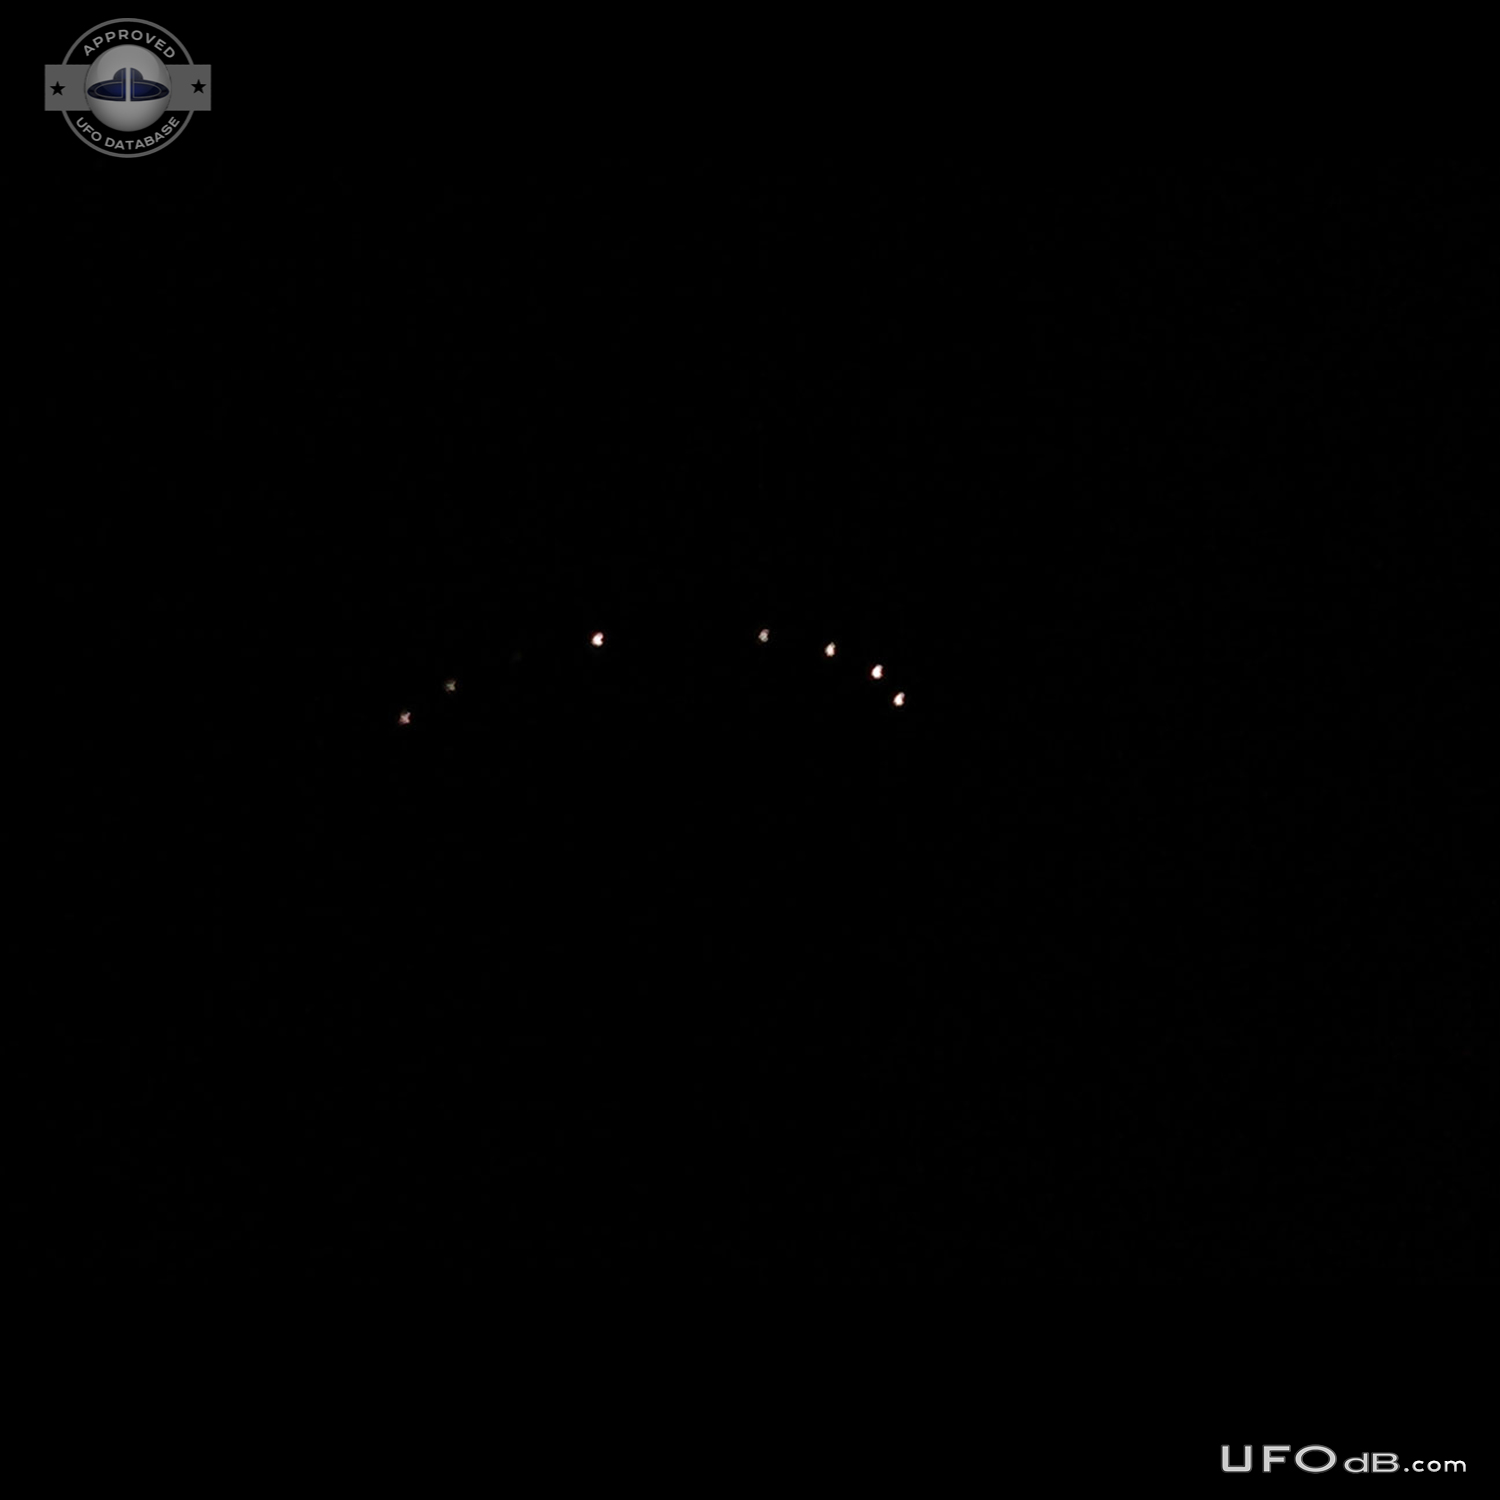 Series of UFOs above the mountains in Portland, Oregon USA 2015 UFO Picture #627-1